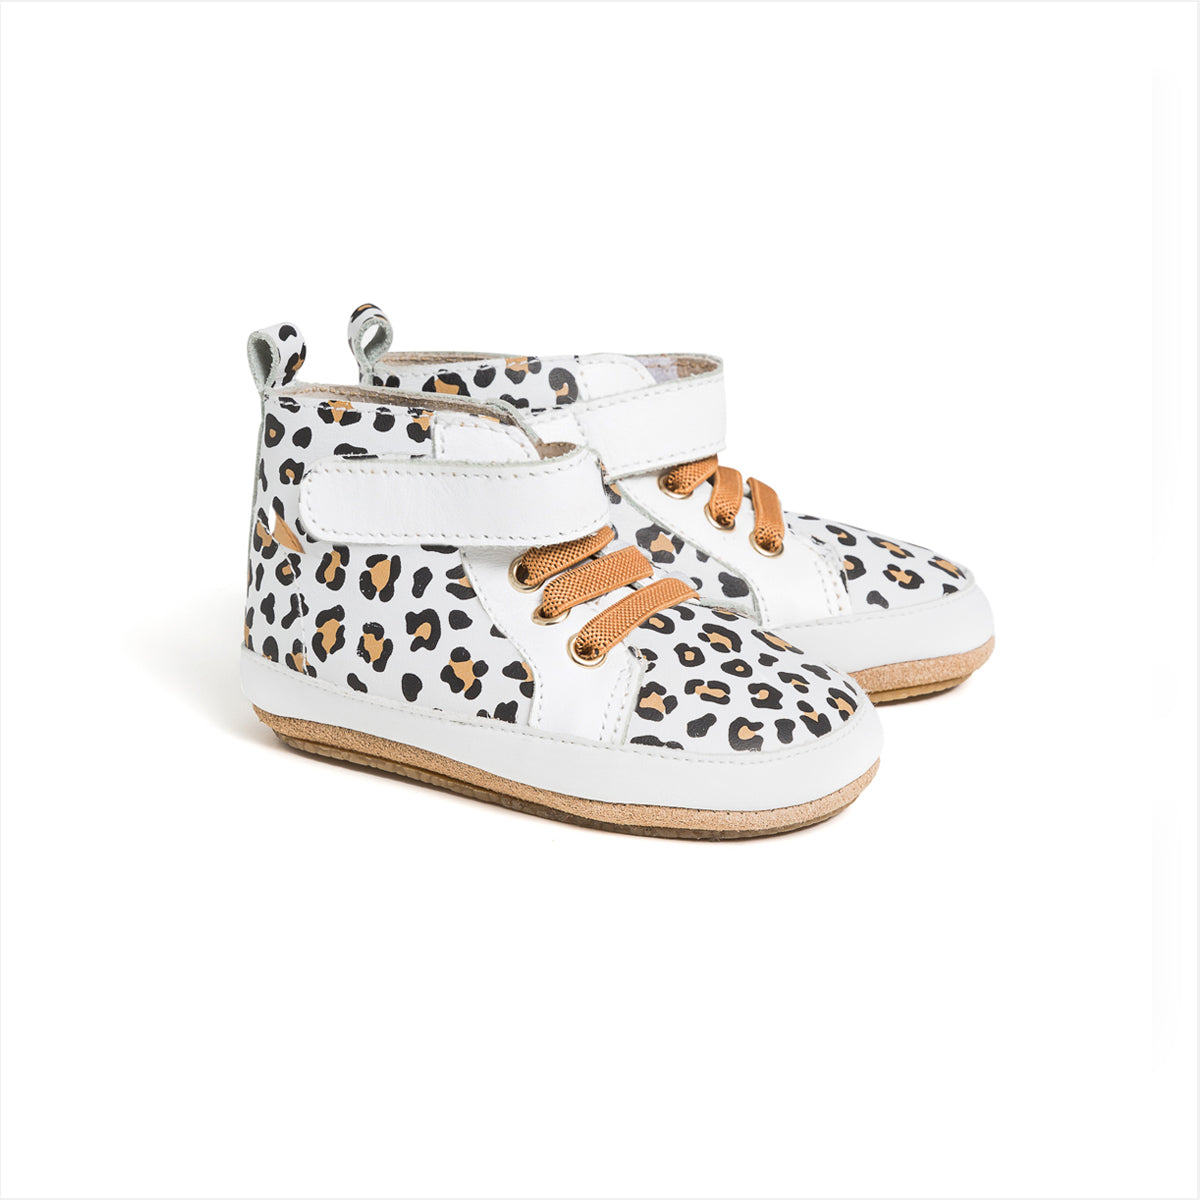 White Hi Top shoes with leopard detail